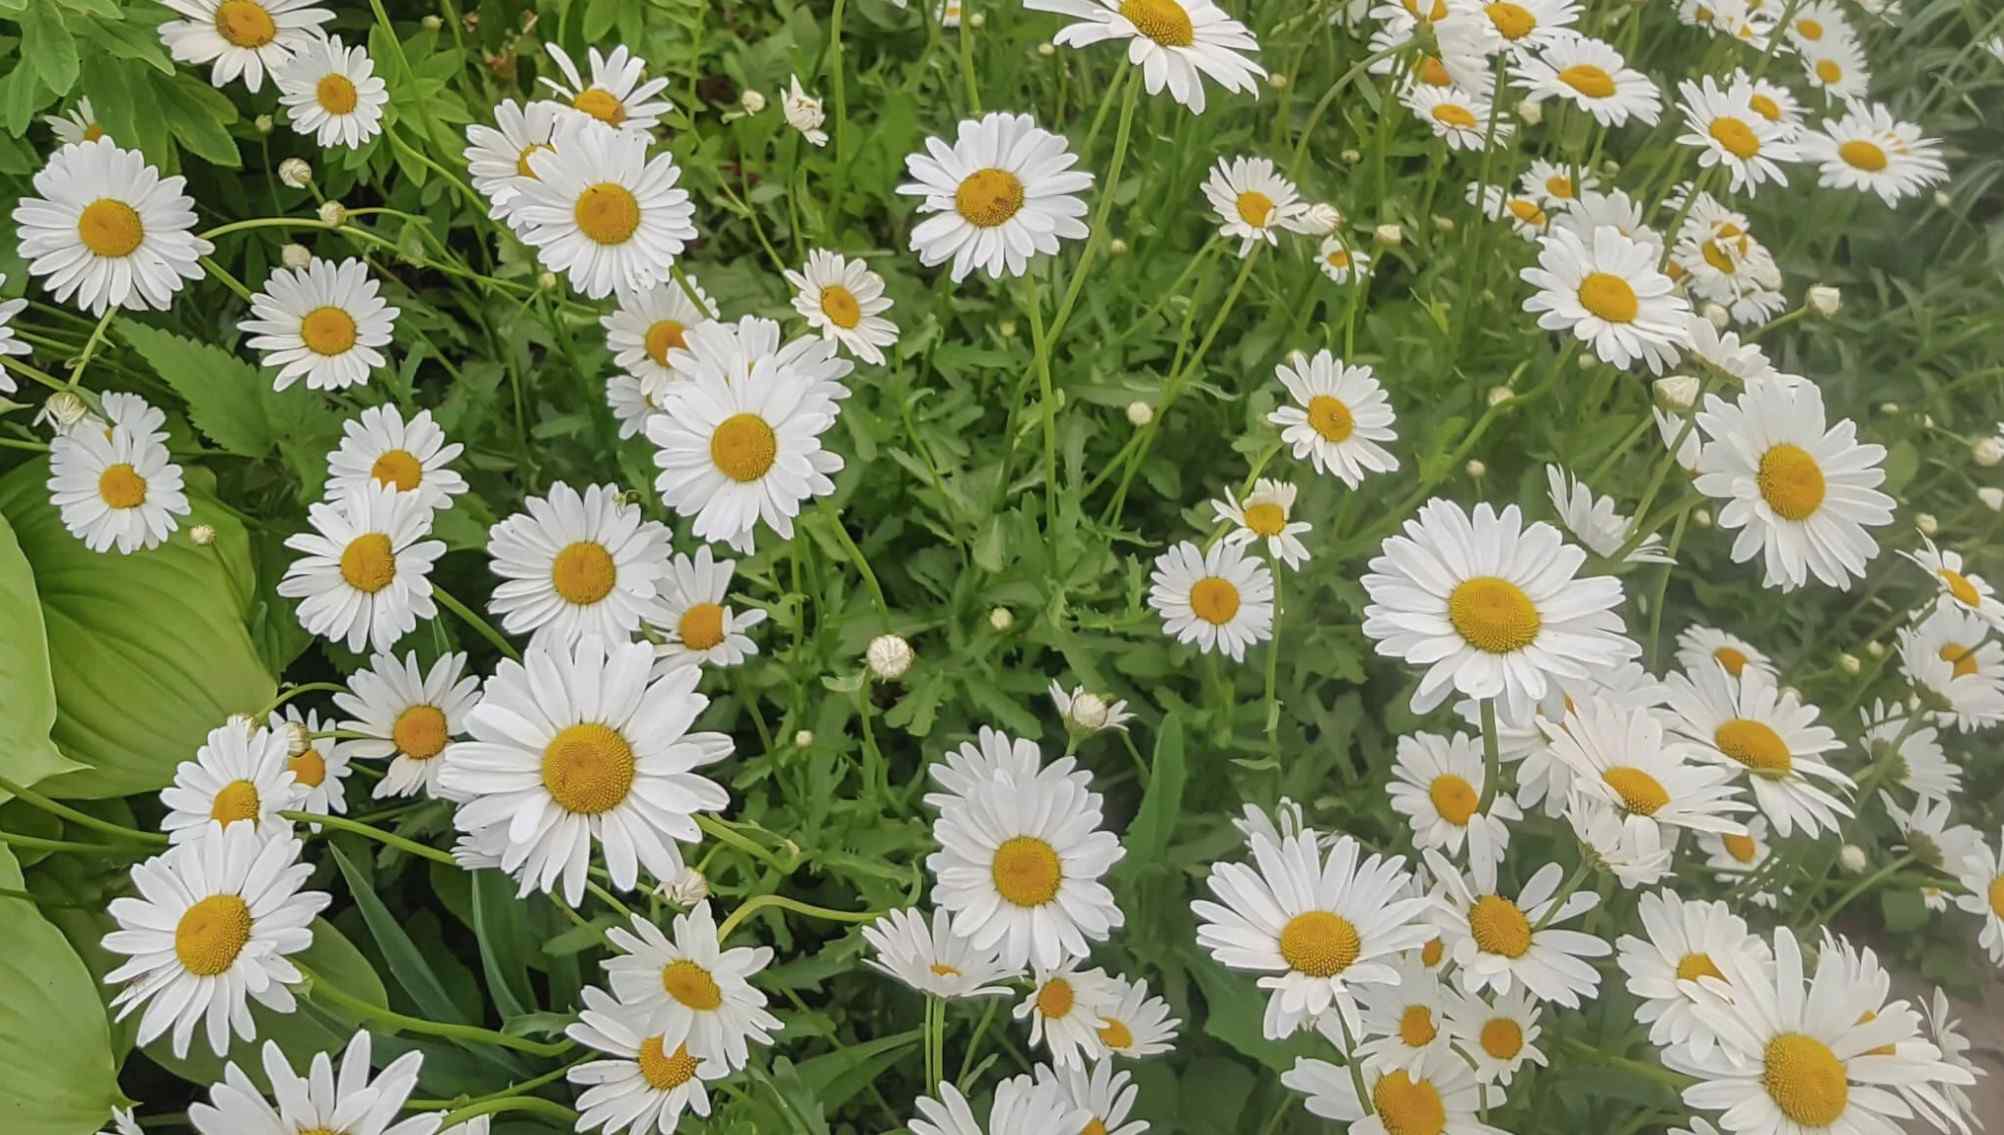 It is common practice to grow German Chamomile in Hungary, Egypt, Eastern Europe, and France, whereas Roman Chamomile is grown in Germany, France, Spain, Italy, Morocco, and France.